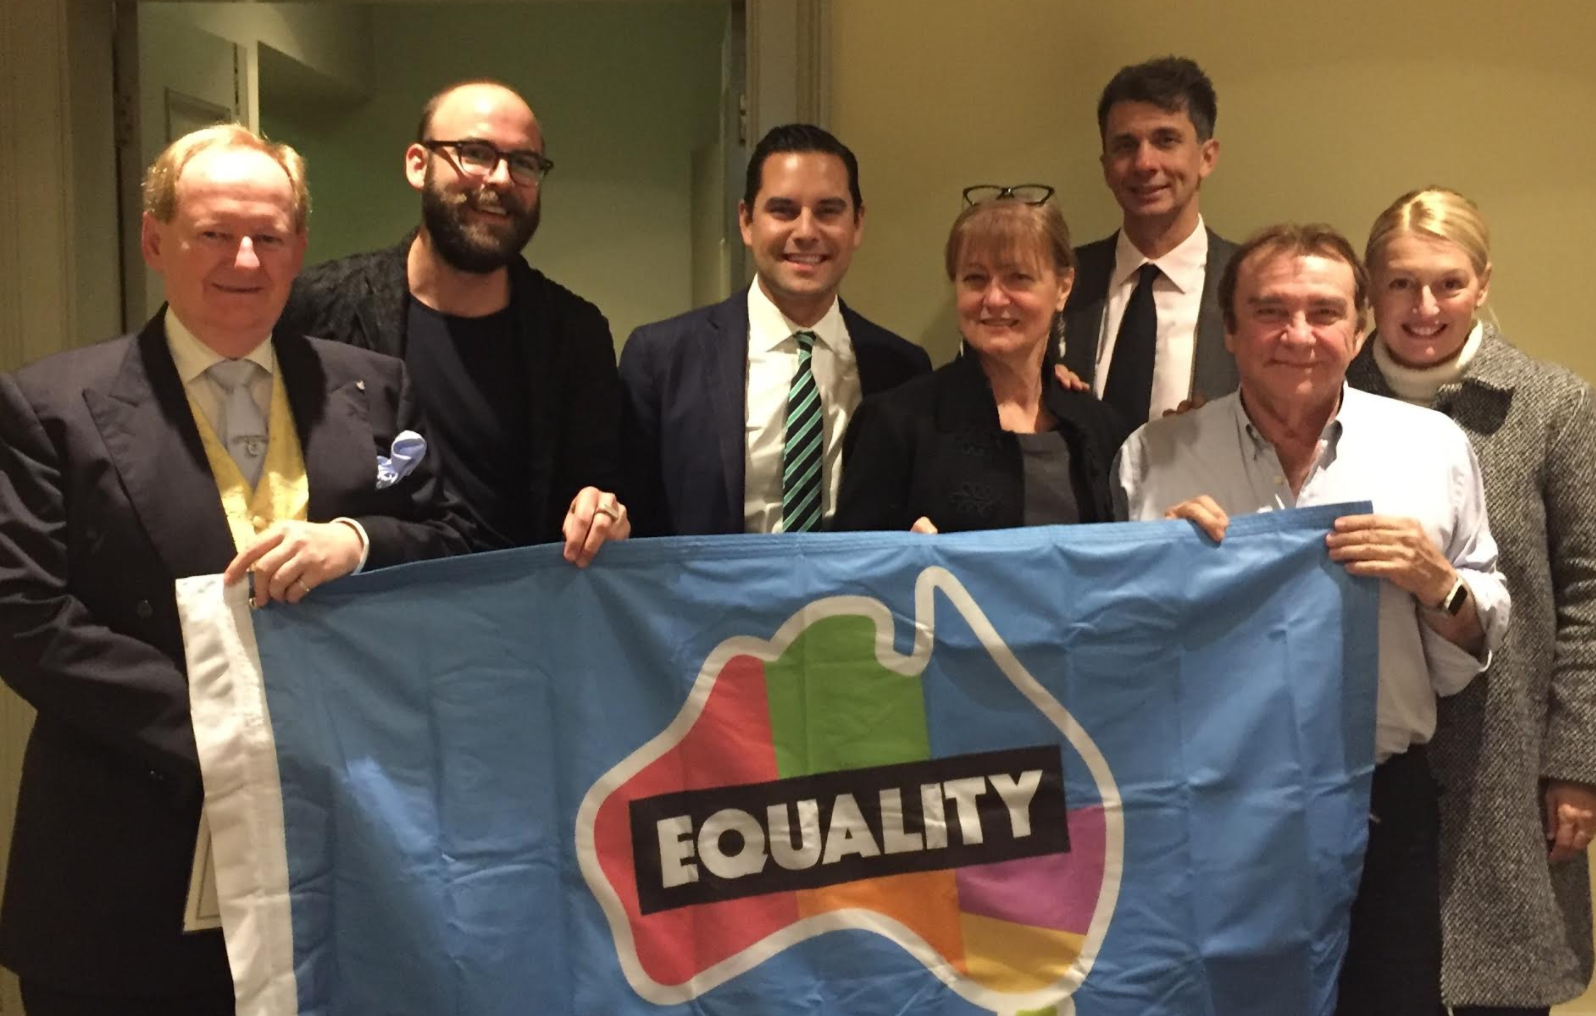 Woollahra becomes first Liberal lead council to call for a free vote on marriage equality